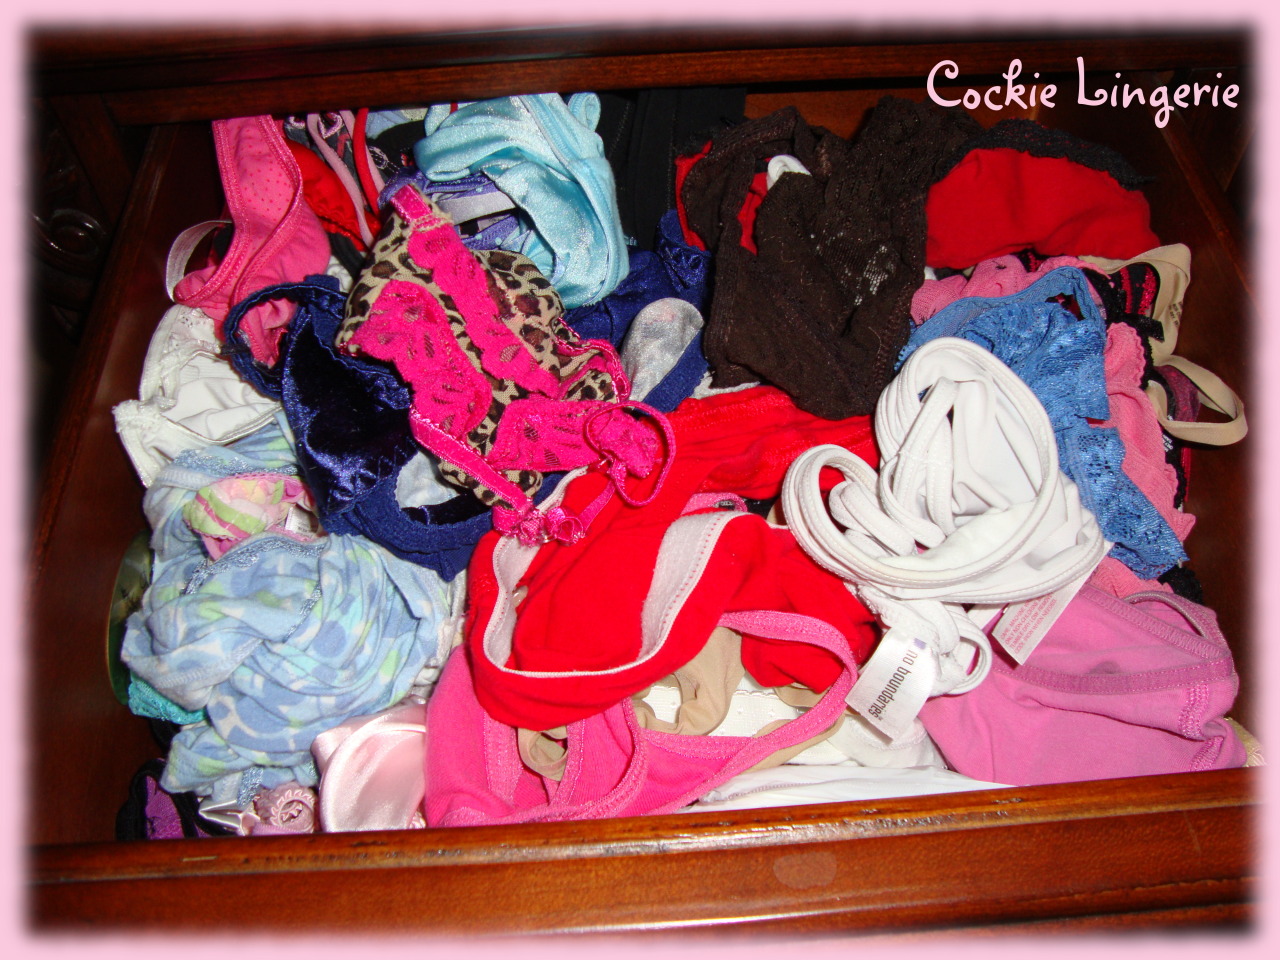 Cocky Lingerie’s ~ Pantie Drawer ParadeYou know you like to peek in those wonderful